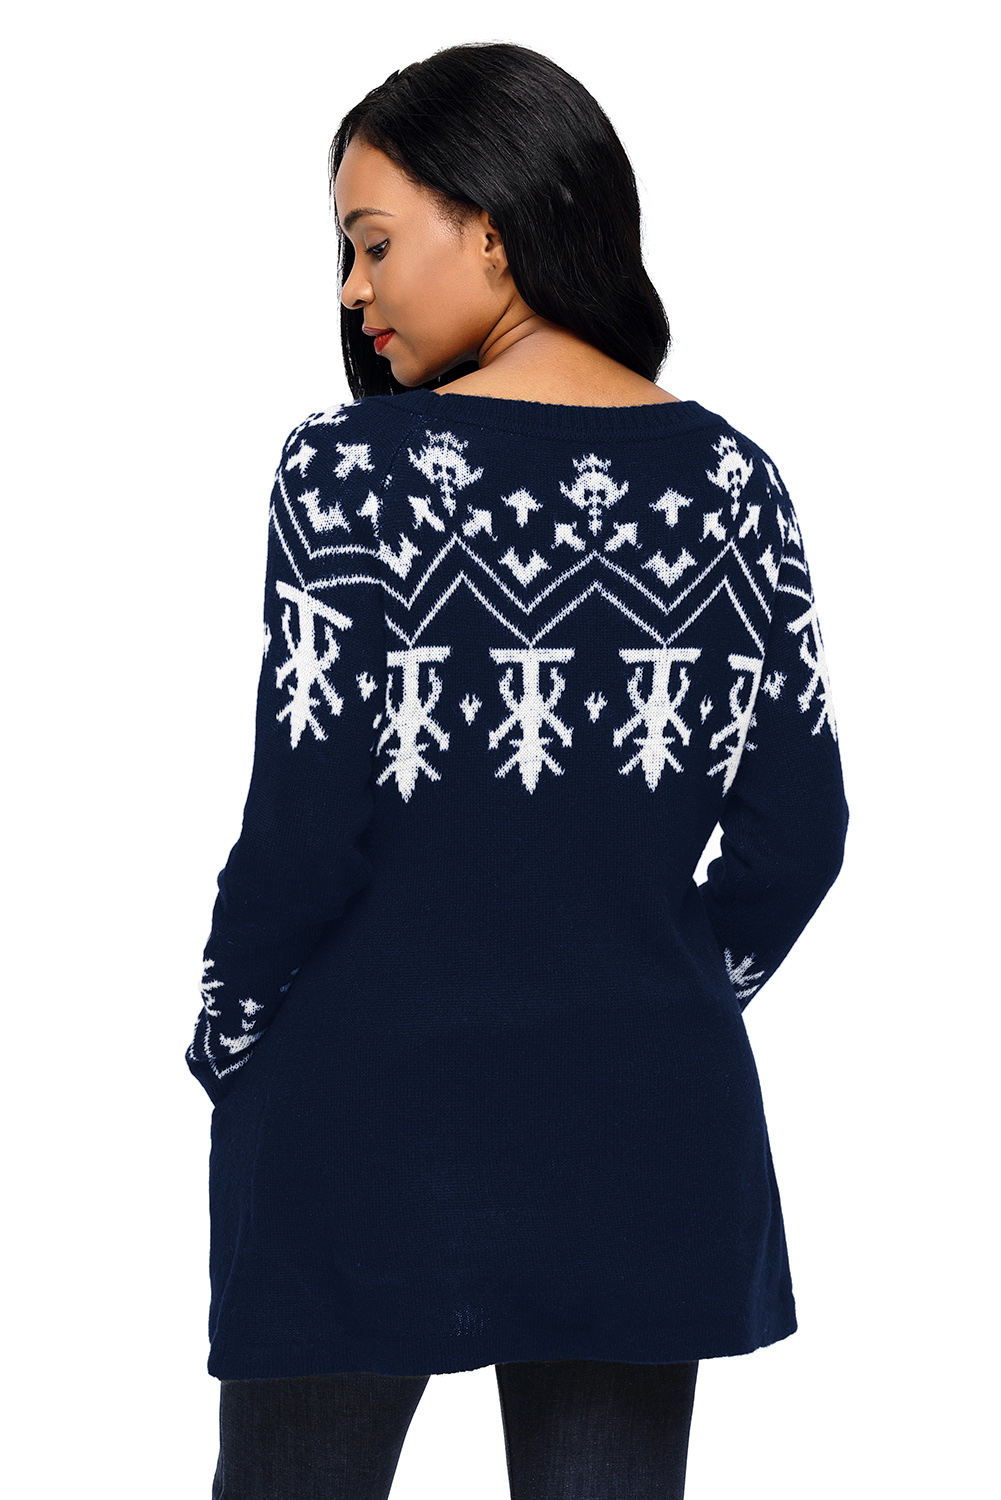 BY27720-5 Navy A-line Casual Fit Christmas Fashion Sweater